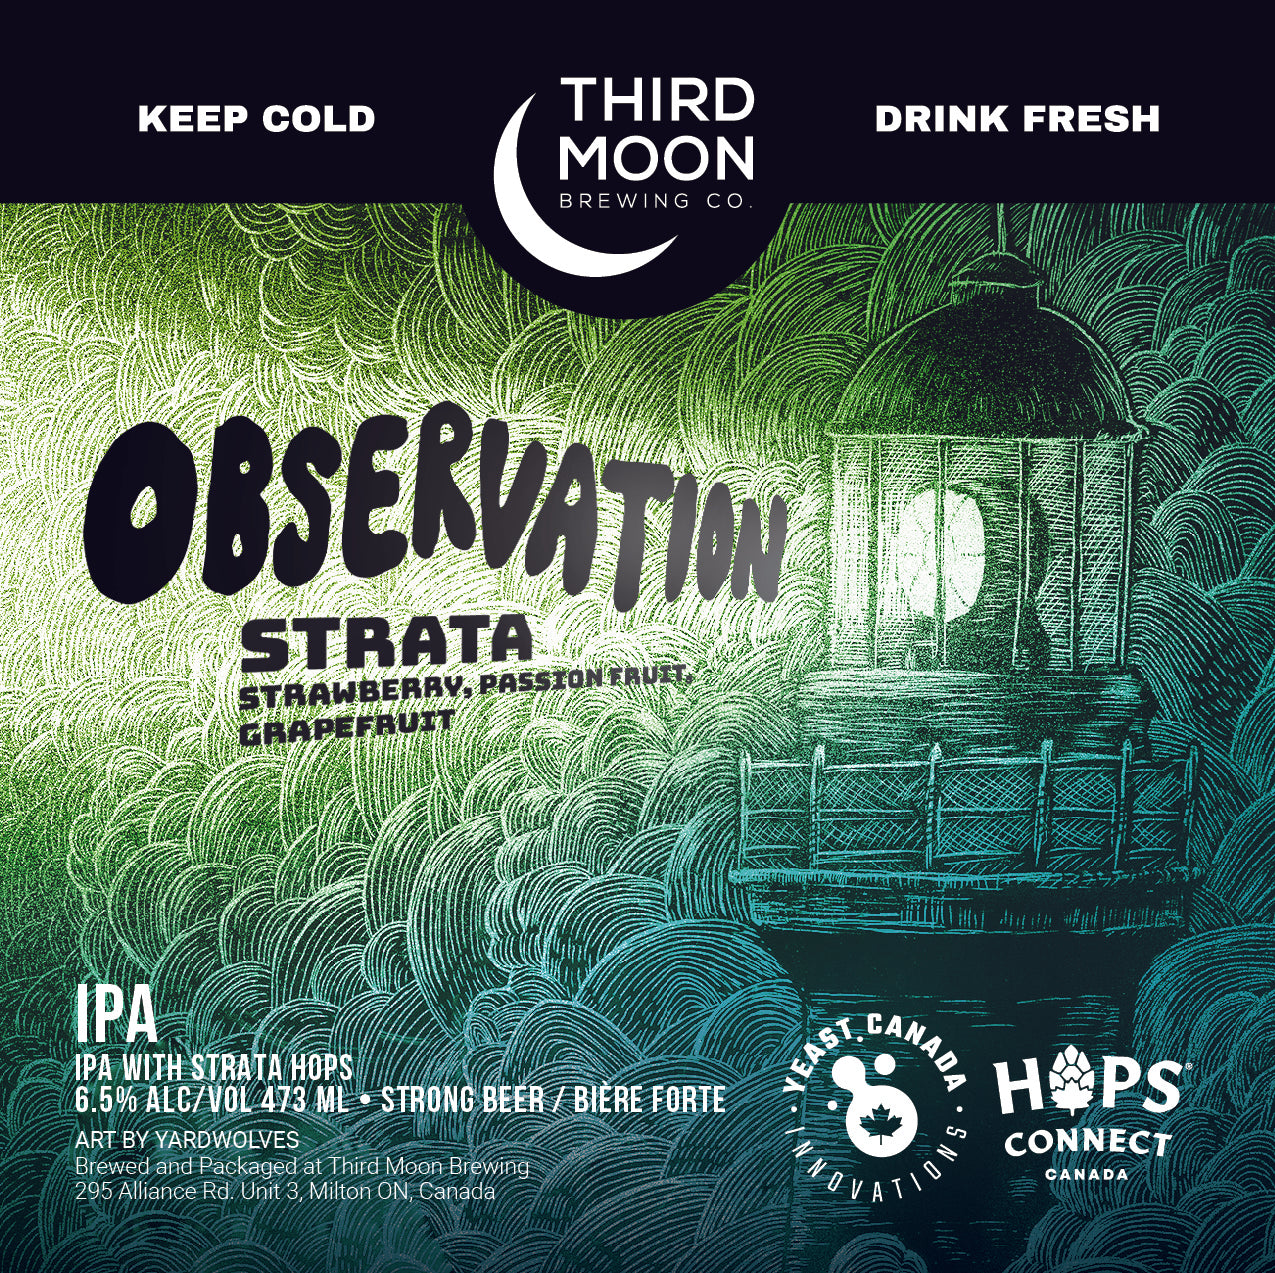 IPA - 4-pk of "Observation (Strata)" tall cans